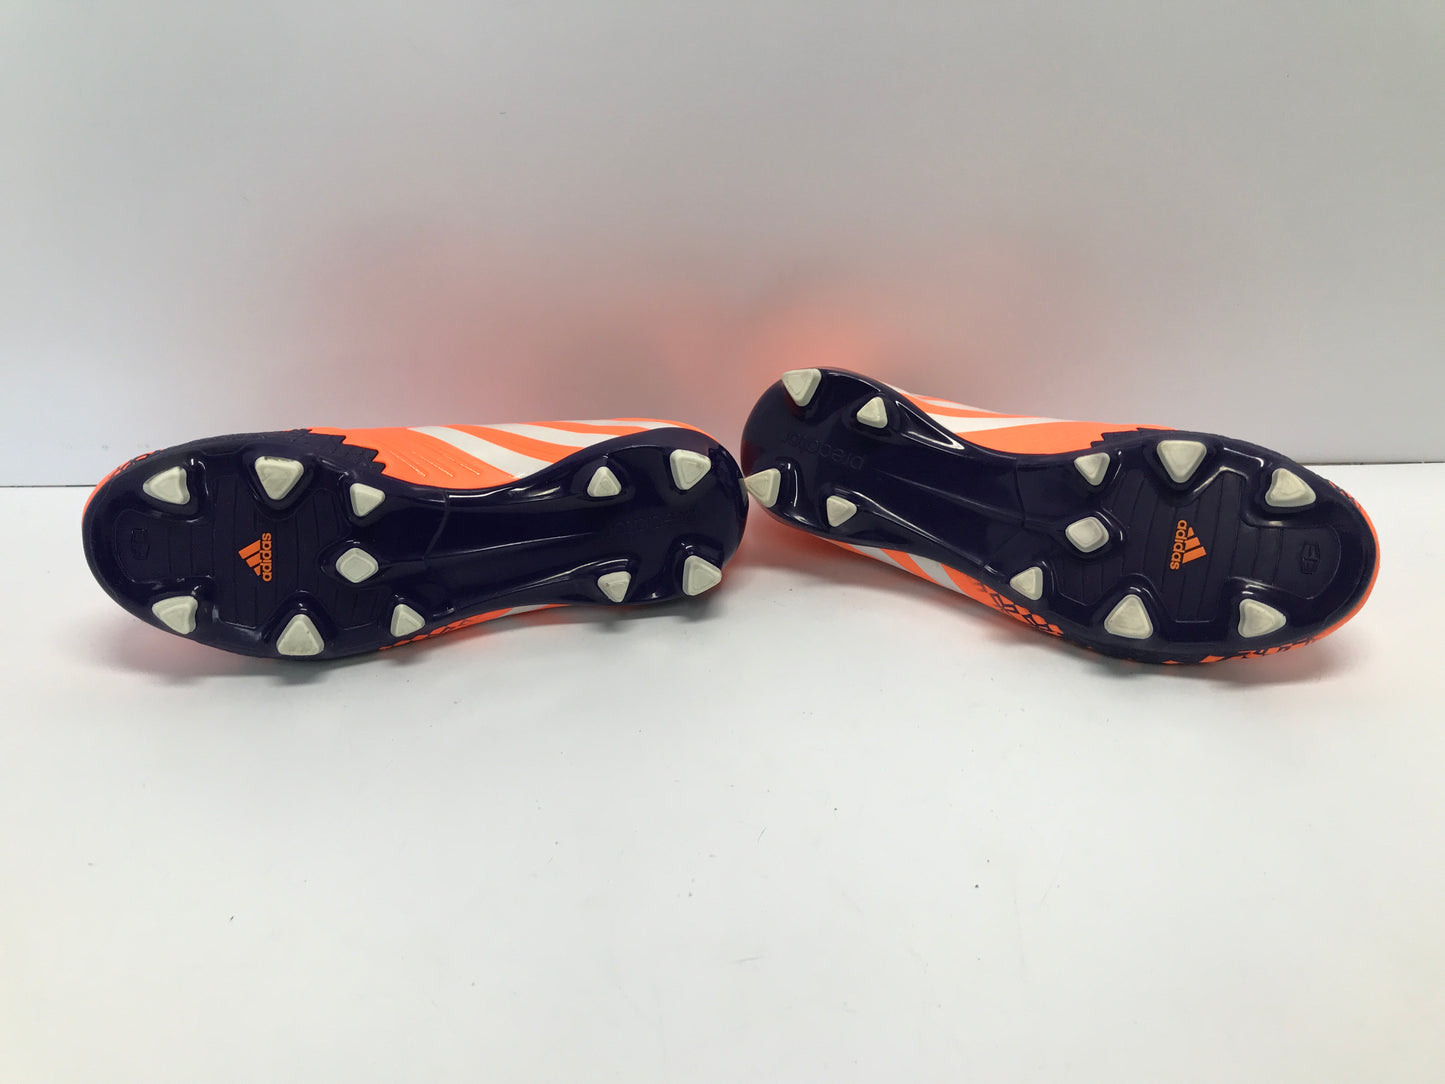 Soccer Shoes Cleats Women's Ladies Size 4 Adidas Absolado Tangerine Blue Like New